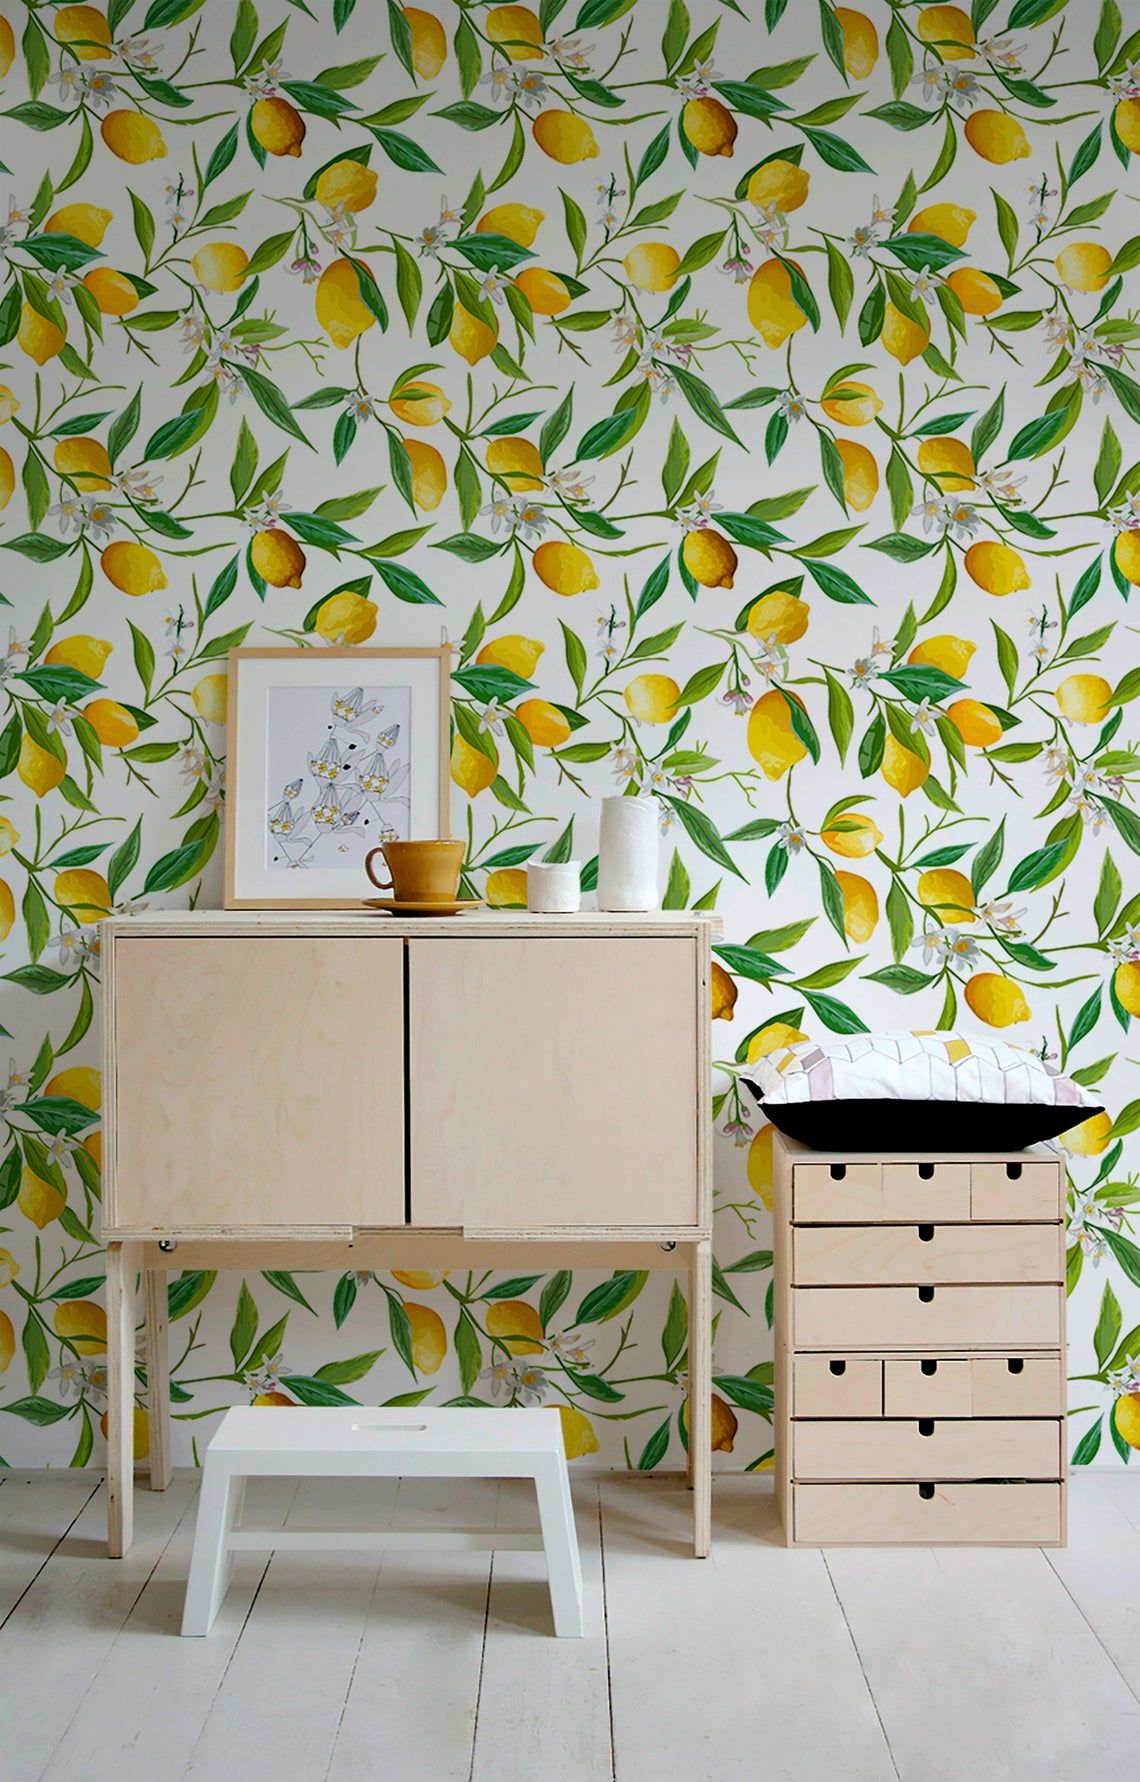 Does Peel and Stick Wallpaper Damage Walls? | Apartment Therapy